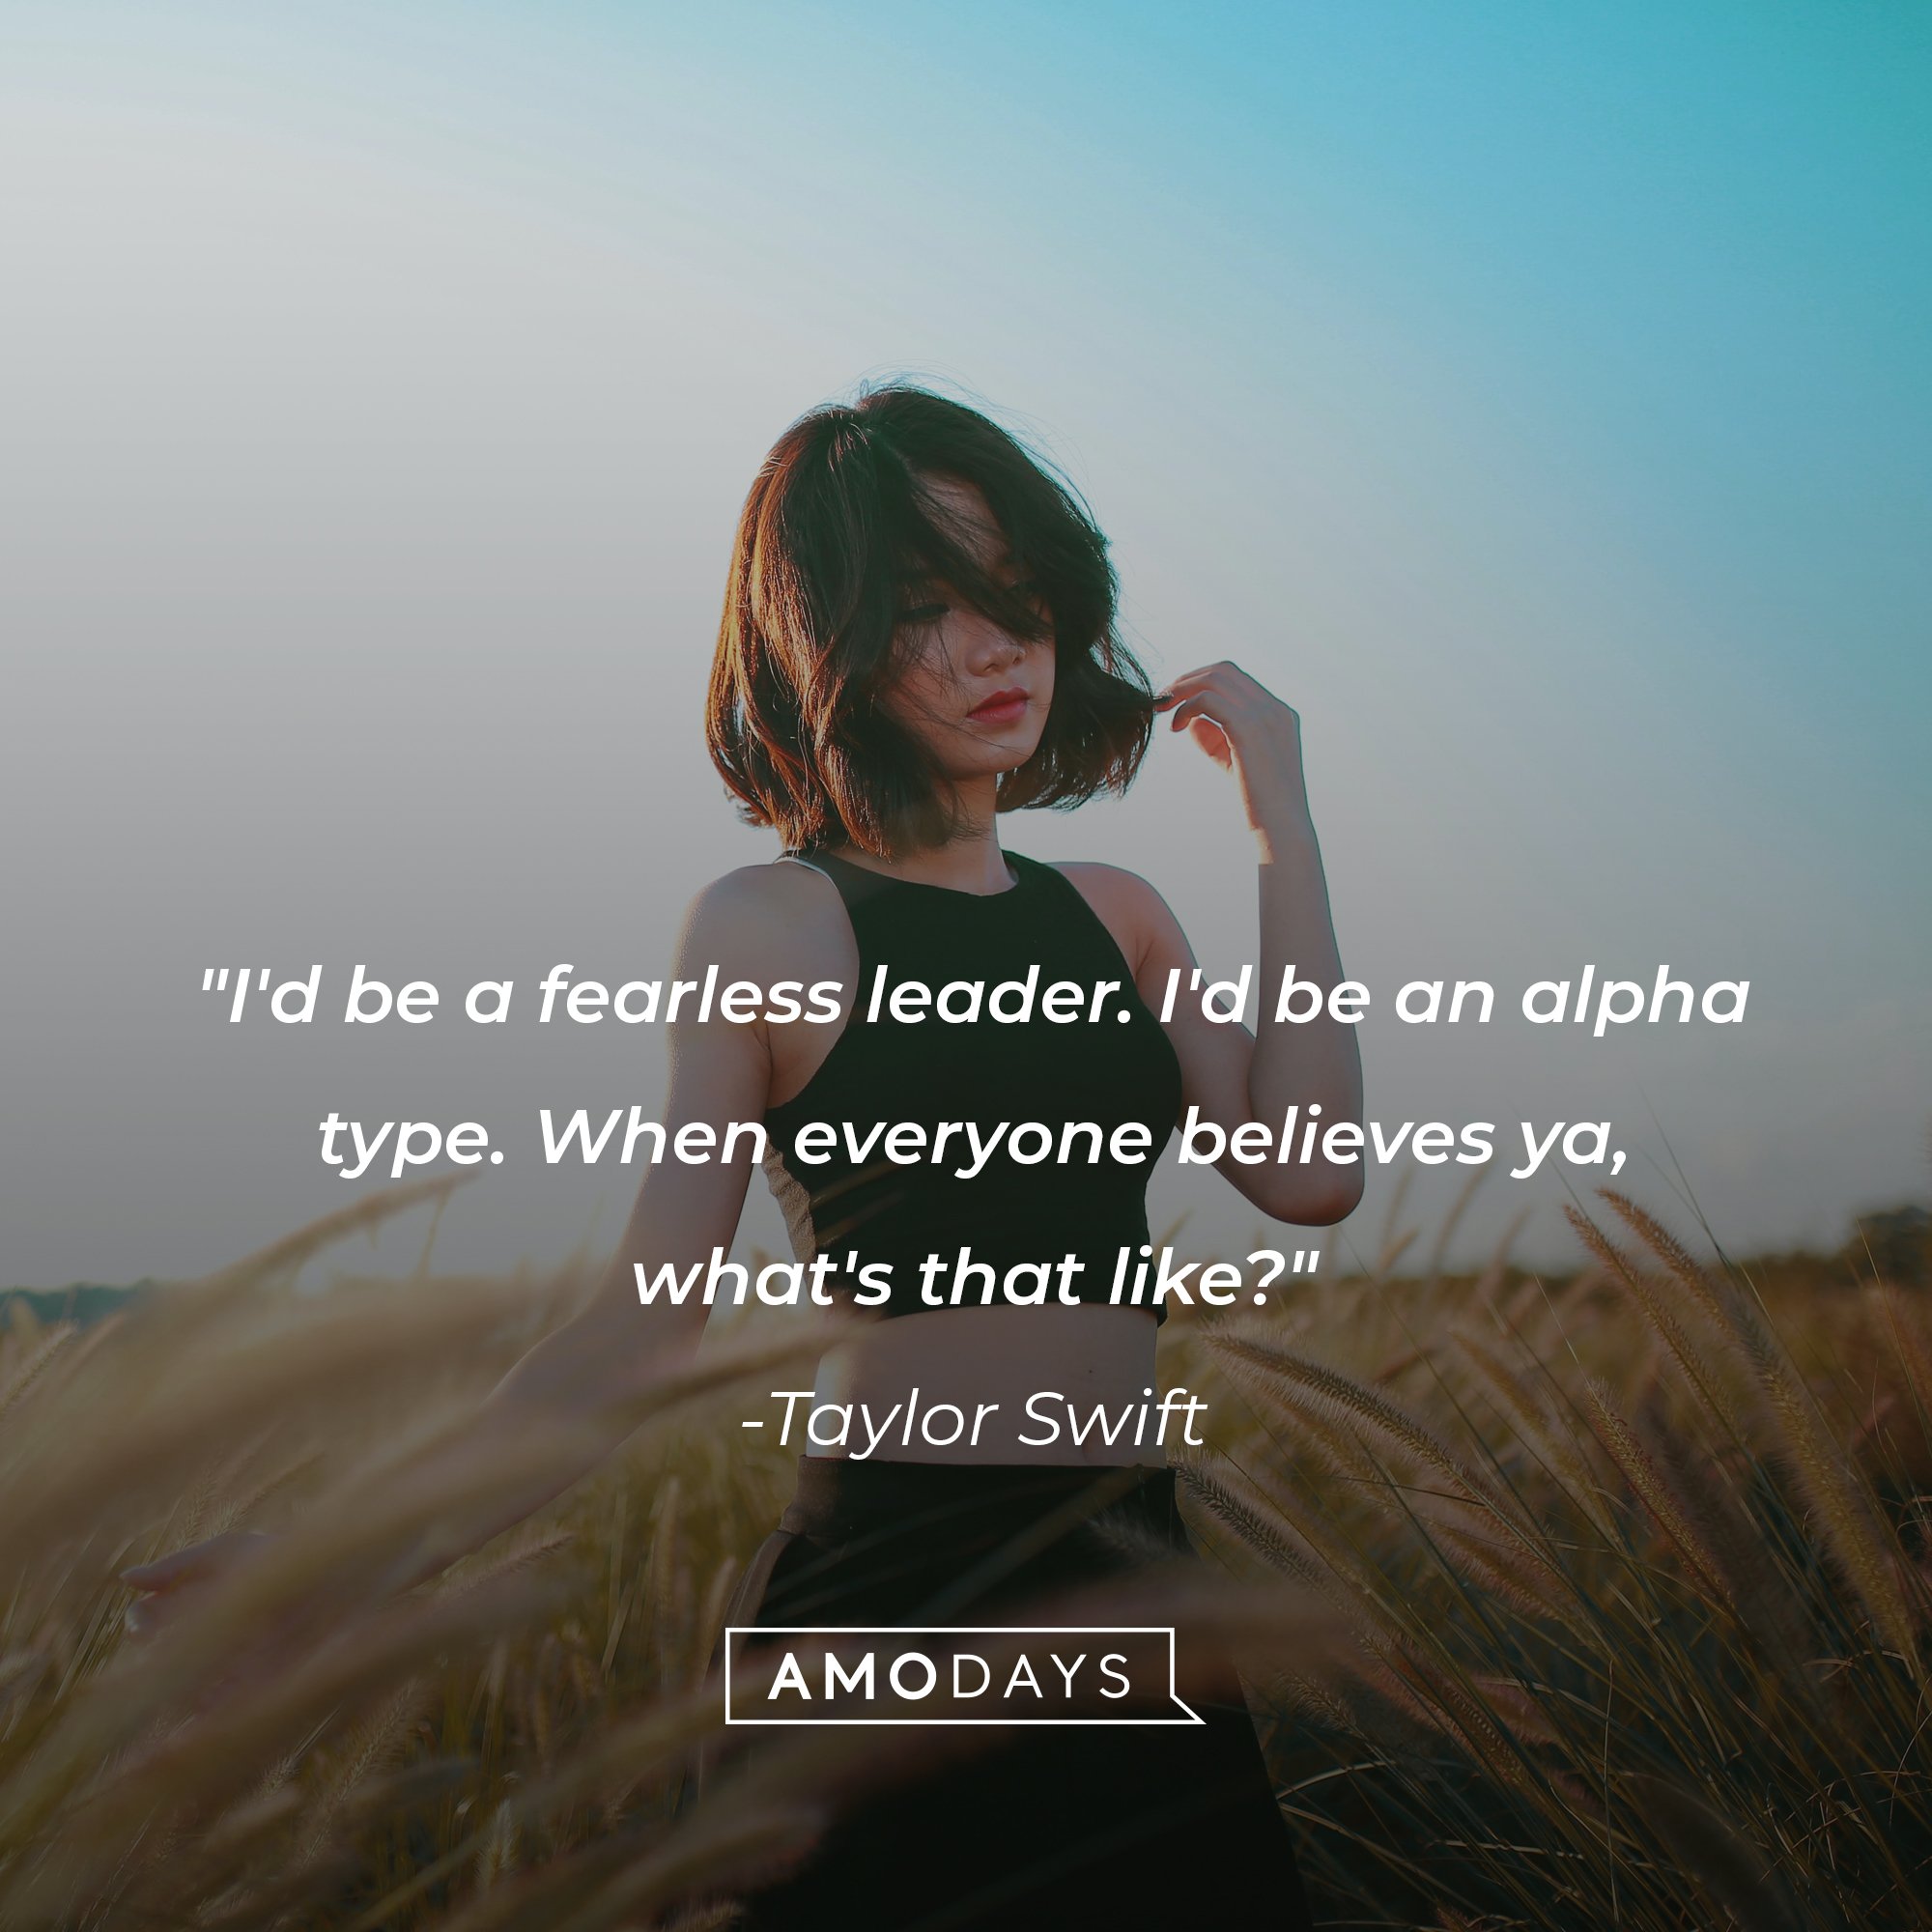   Taylor Swift’s quote: "I'd be a fearless leader. I'd be an alpha type. When everyone believes ya, what's that like?" | Image: AmoDays